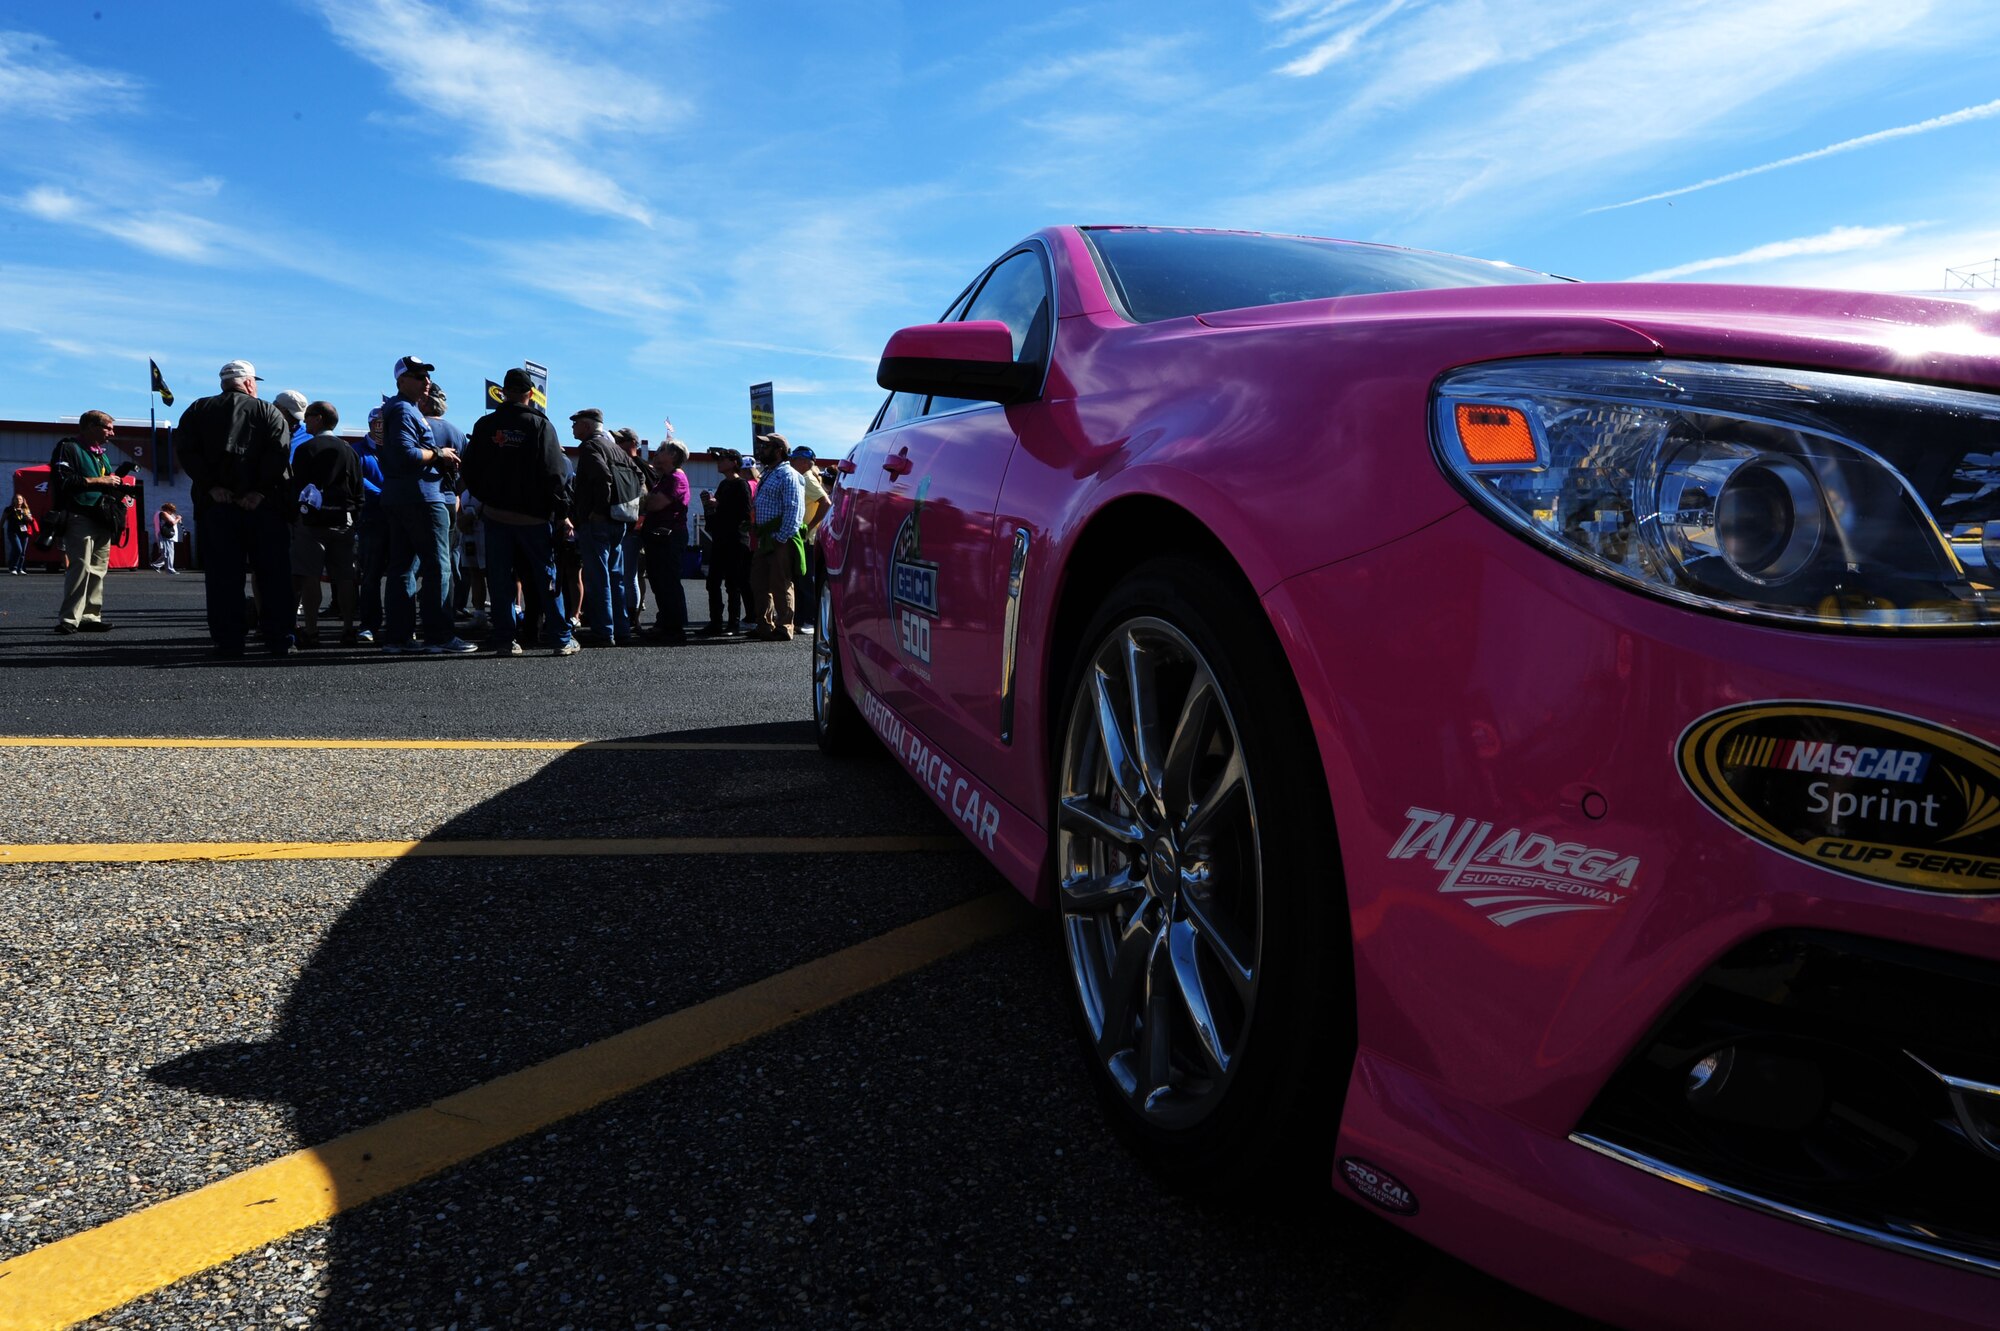 The pace car sits outside the garage and pit area at the Talladega Superspeedway in Talladega, Ala., Oct. 19, 2014. The pace car was painted pink in honor of breast cancer awareness month. (U.S. Air Force photo by Airman 1st Class Alexa Culbert)